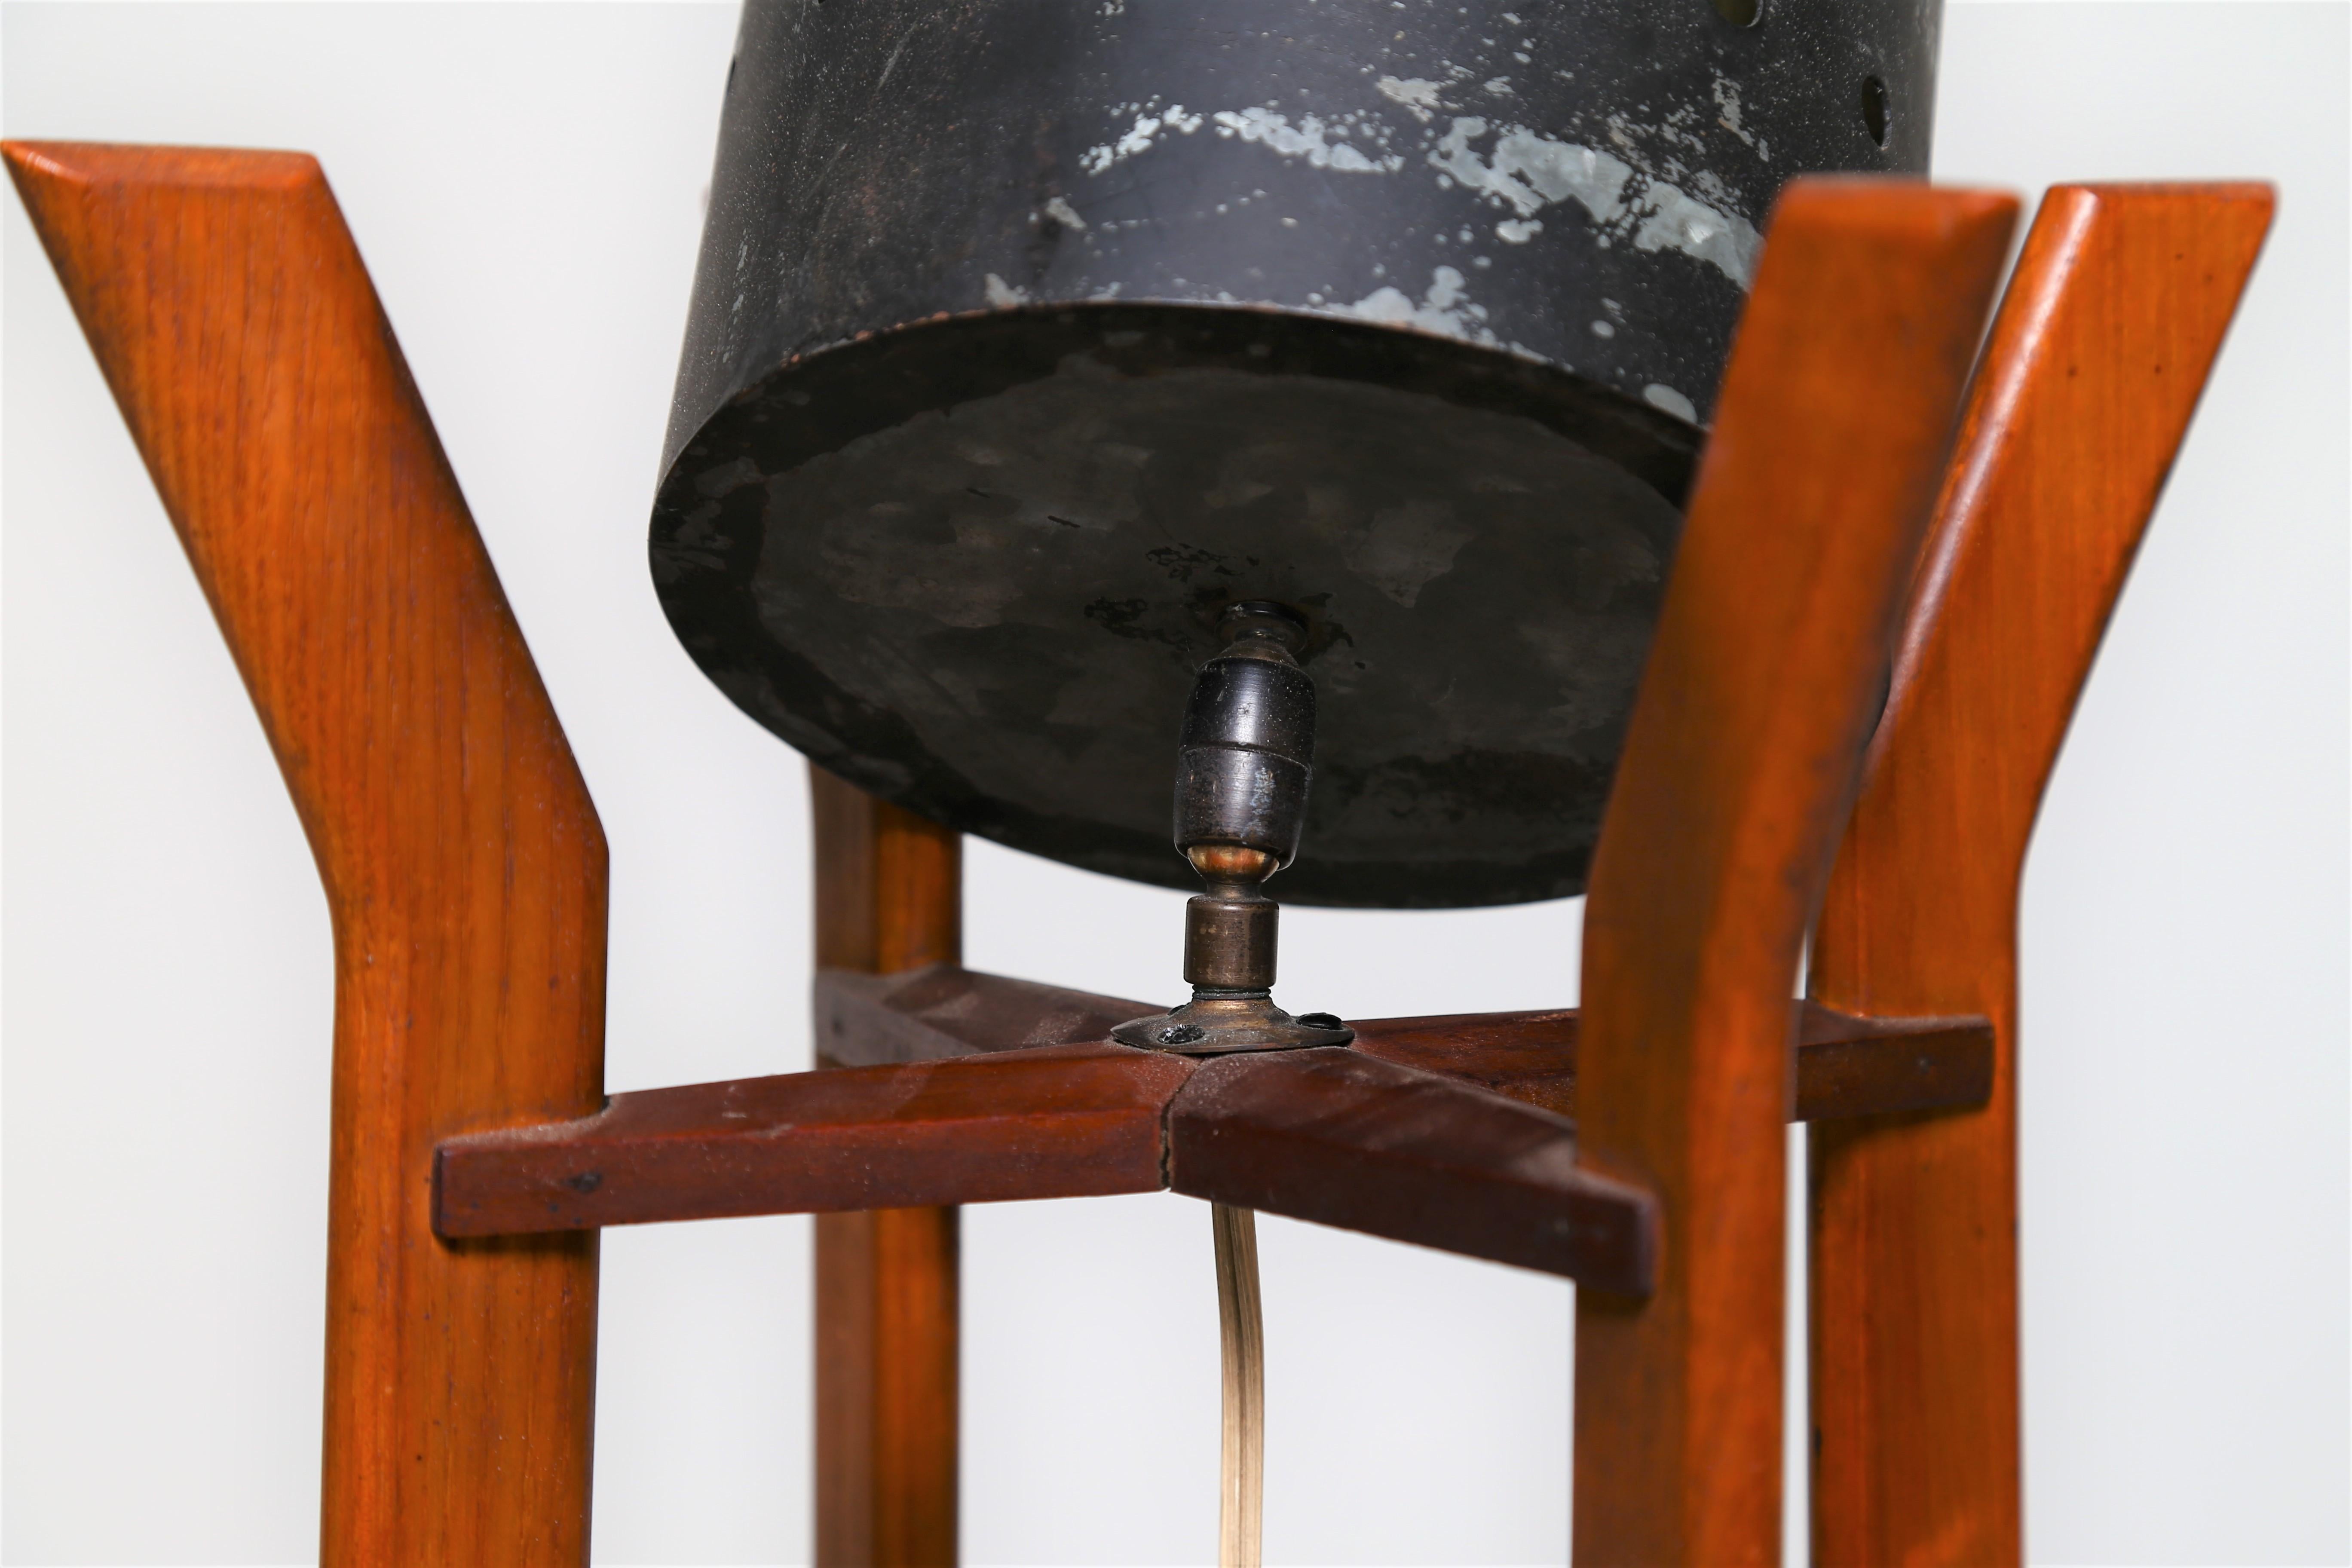 Eccentric French table lamp from 1950. The lamp has a painted tubular metal hat. Its structure is made of wooden planks, four of them are perpendicular and serve as a support, while in the middle there is a star-shaped element stuck in the support.